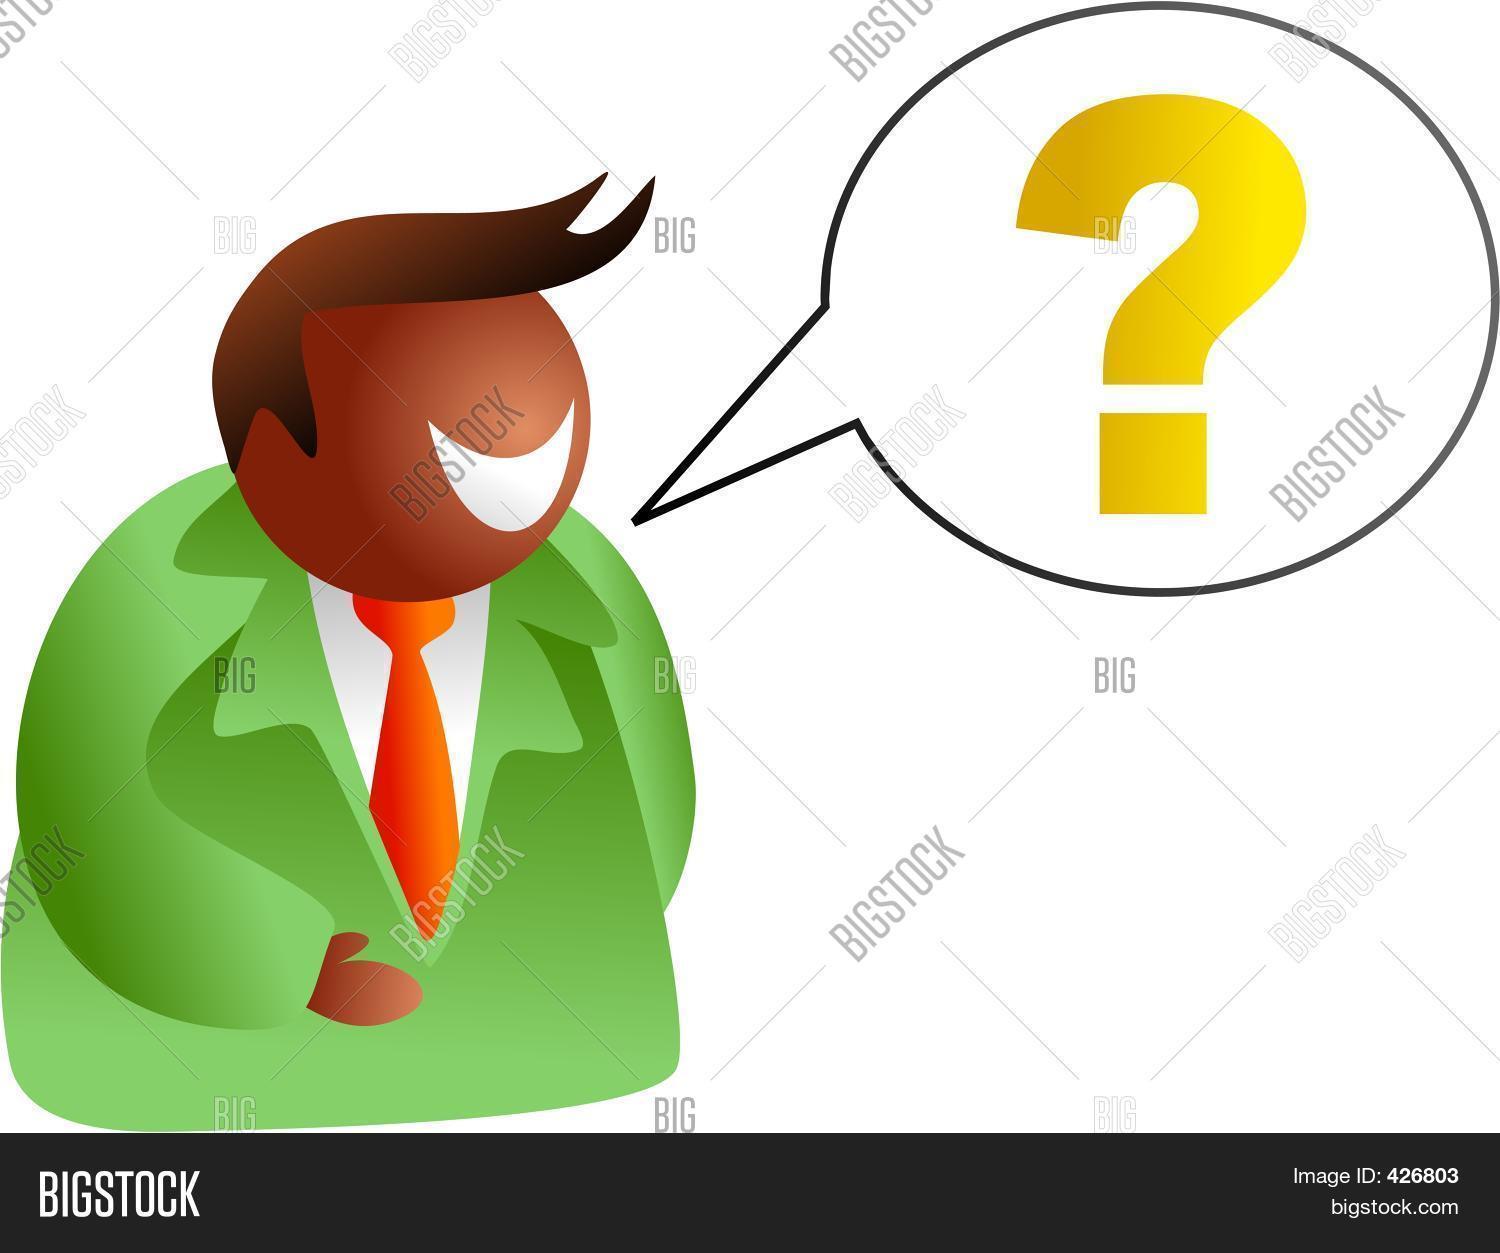 Question Talk Image & Photo (Free Trial).